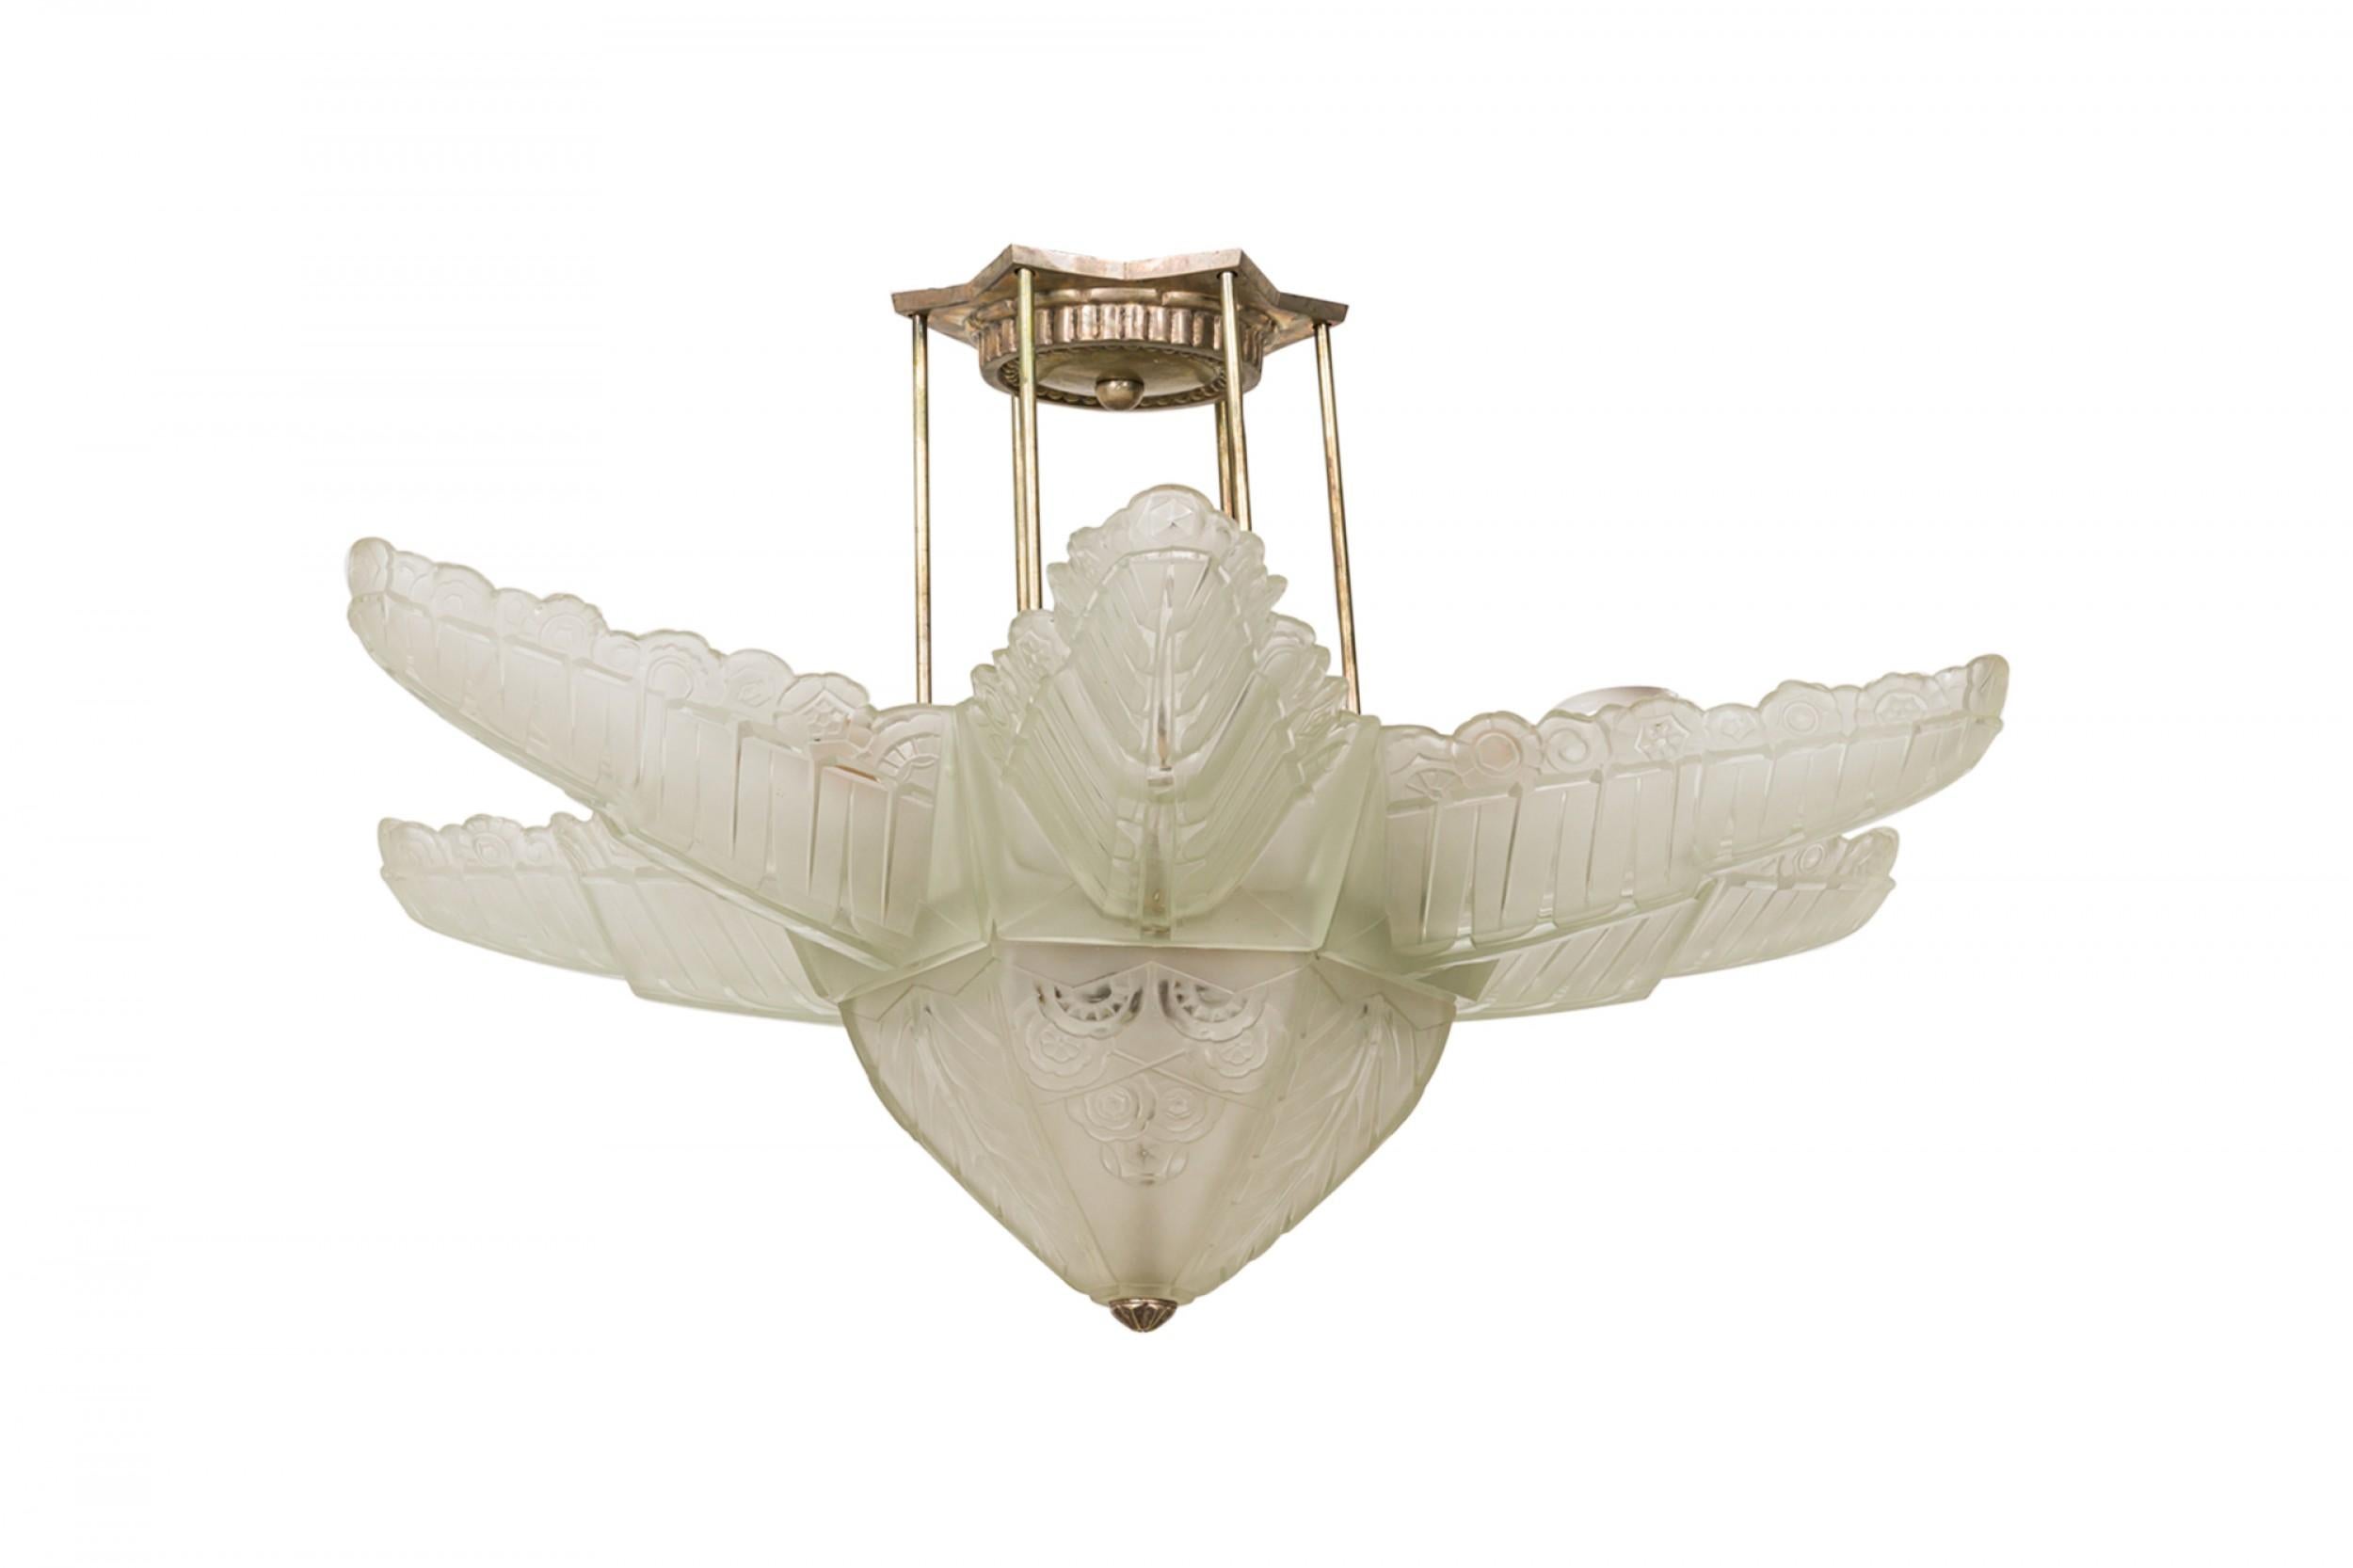 Art Deco (1940s) French frosted glass chandelier in flower / star form consisting of six stylized frosted glass leaves molded in a repoussé of alternating chevron / curvature patterns, emanating above a starburst base capped by a geometric circular